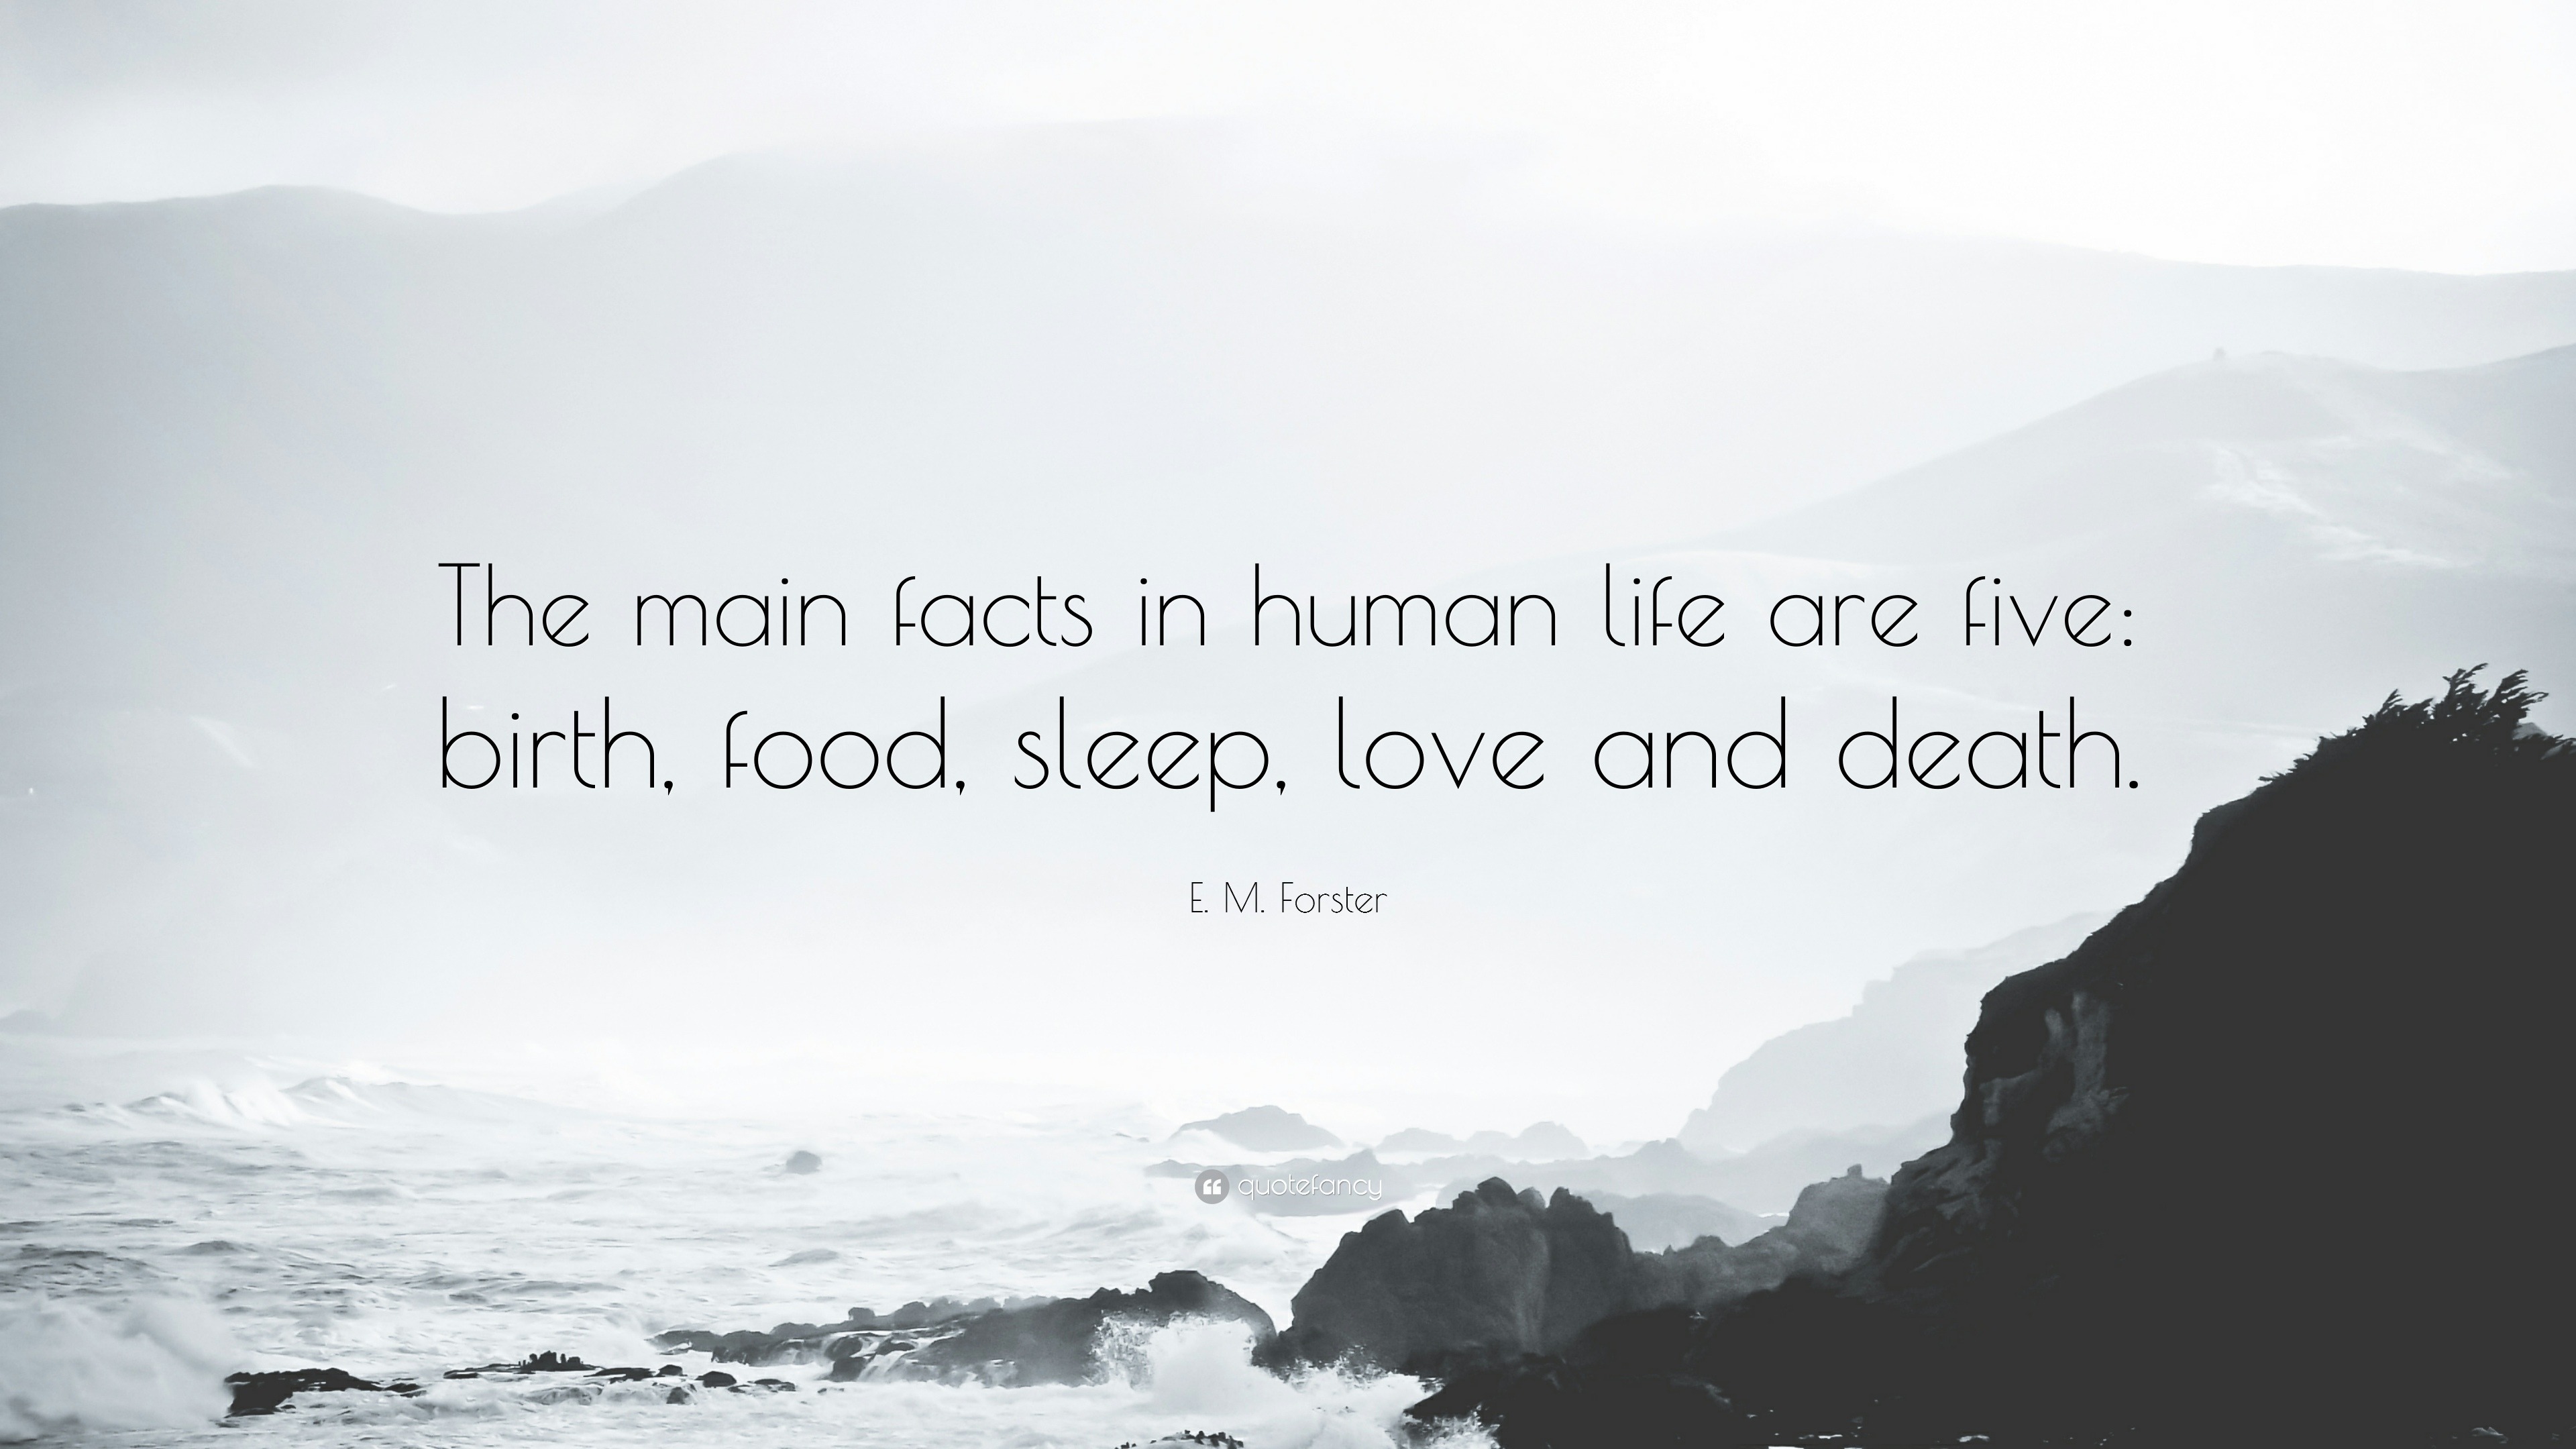 E M Forster Quote “The main facts in human life are five birth